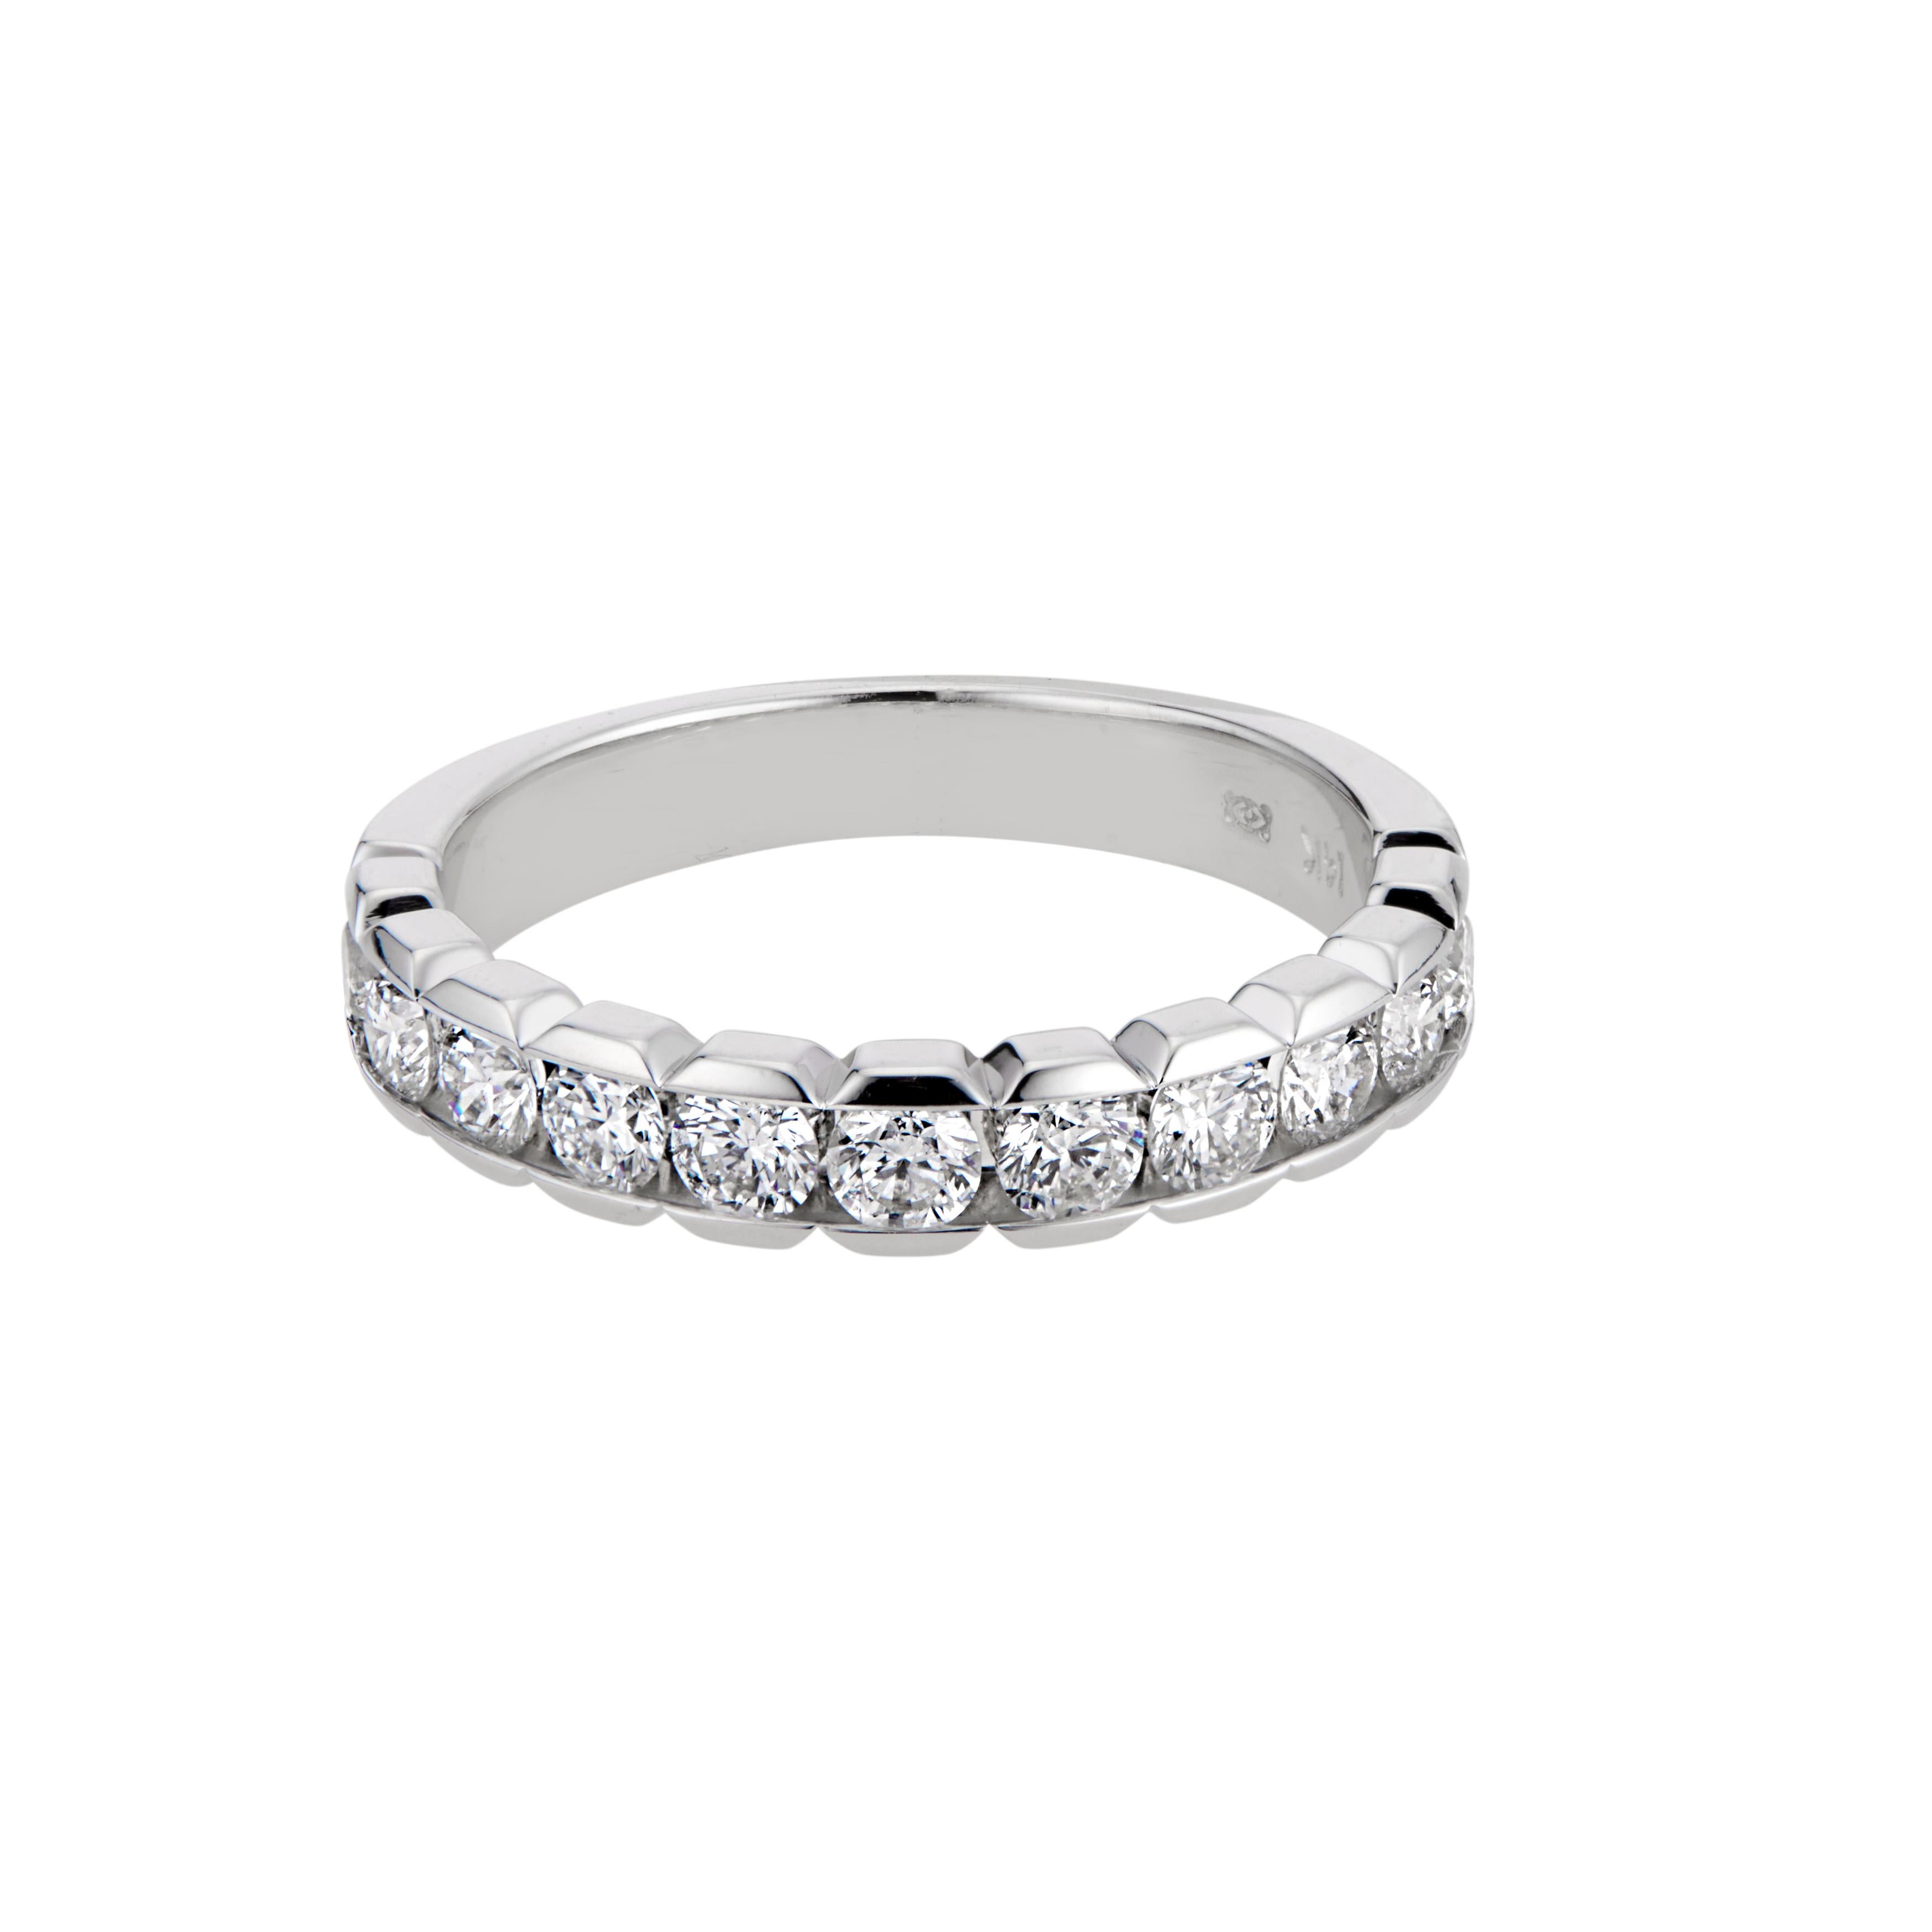 Art carved white gold ring. 11 round cut diamonds set in a platinum wedding band setting. 

11 round brilliant cut diamonds, G-H VS-SI approx. 1.11cts
Size 6 and sizable up/down one size
Platinum 
Stamped: Artcarved
9.1 grams
Width at top: 4.9mm